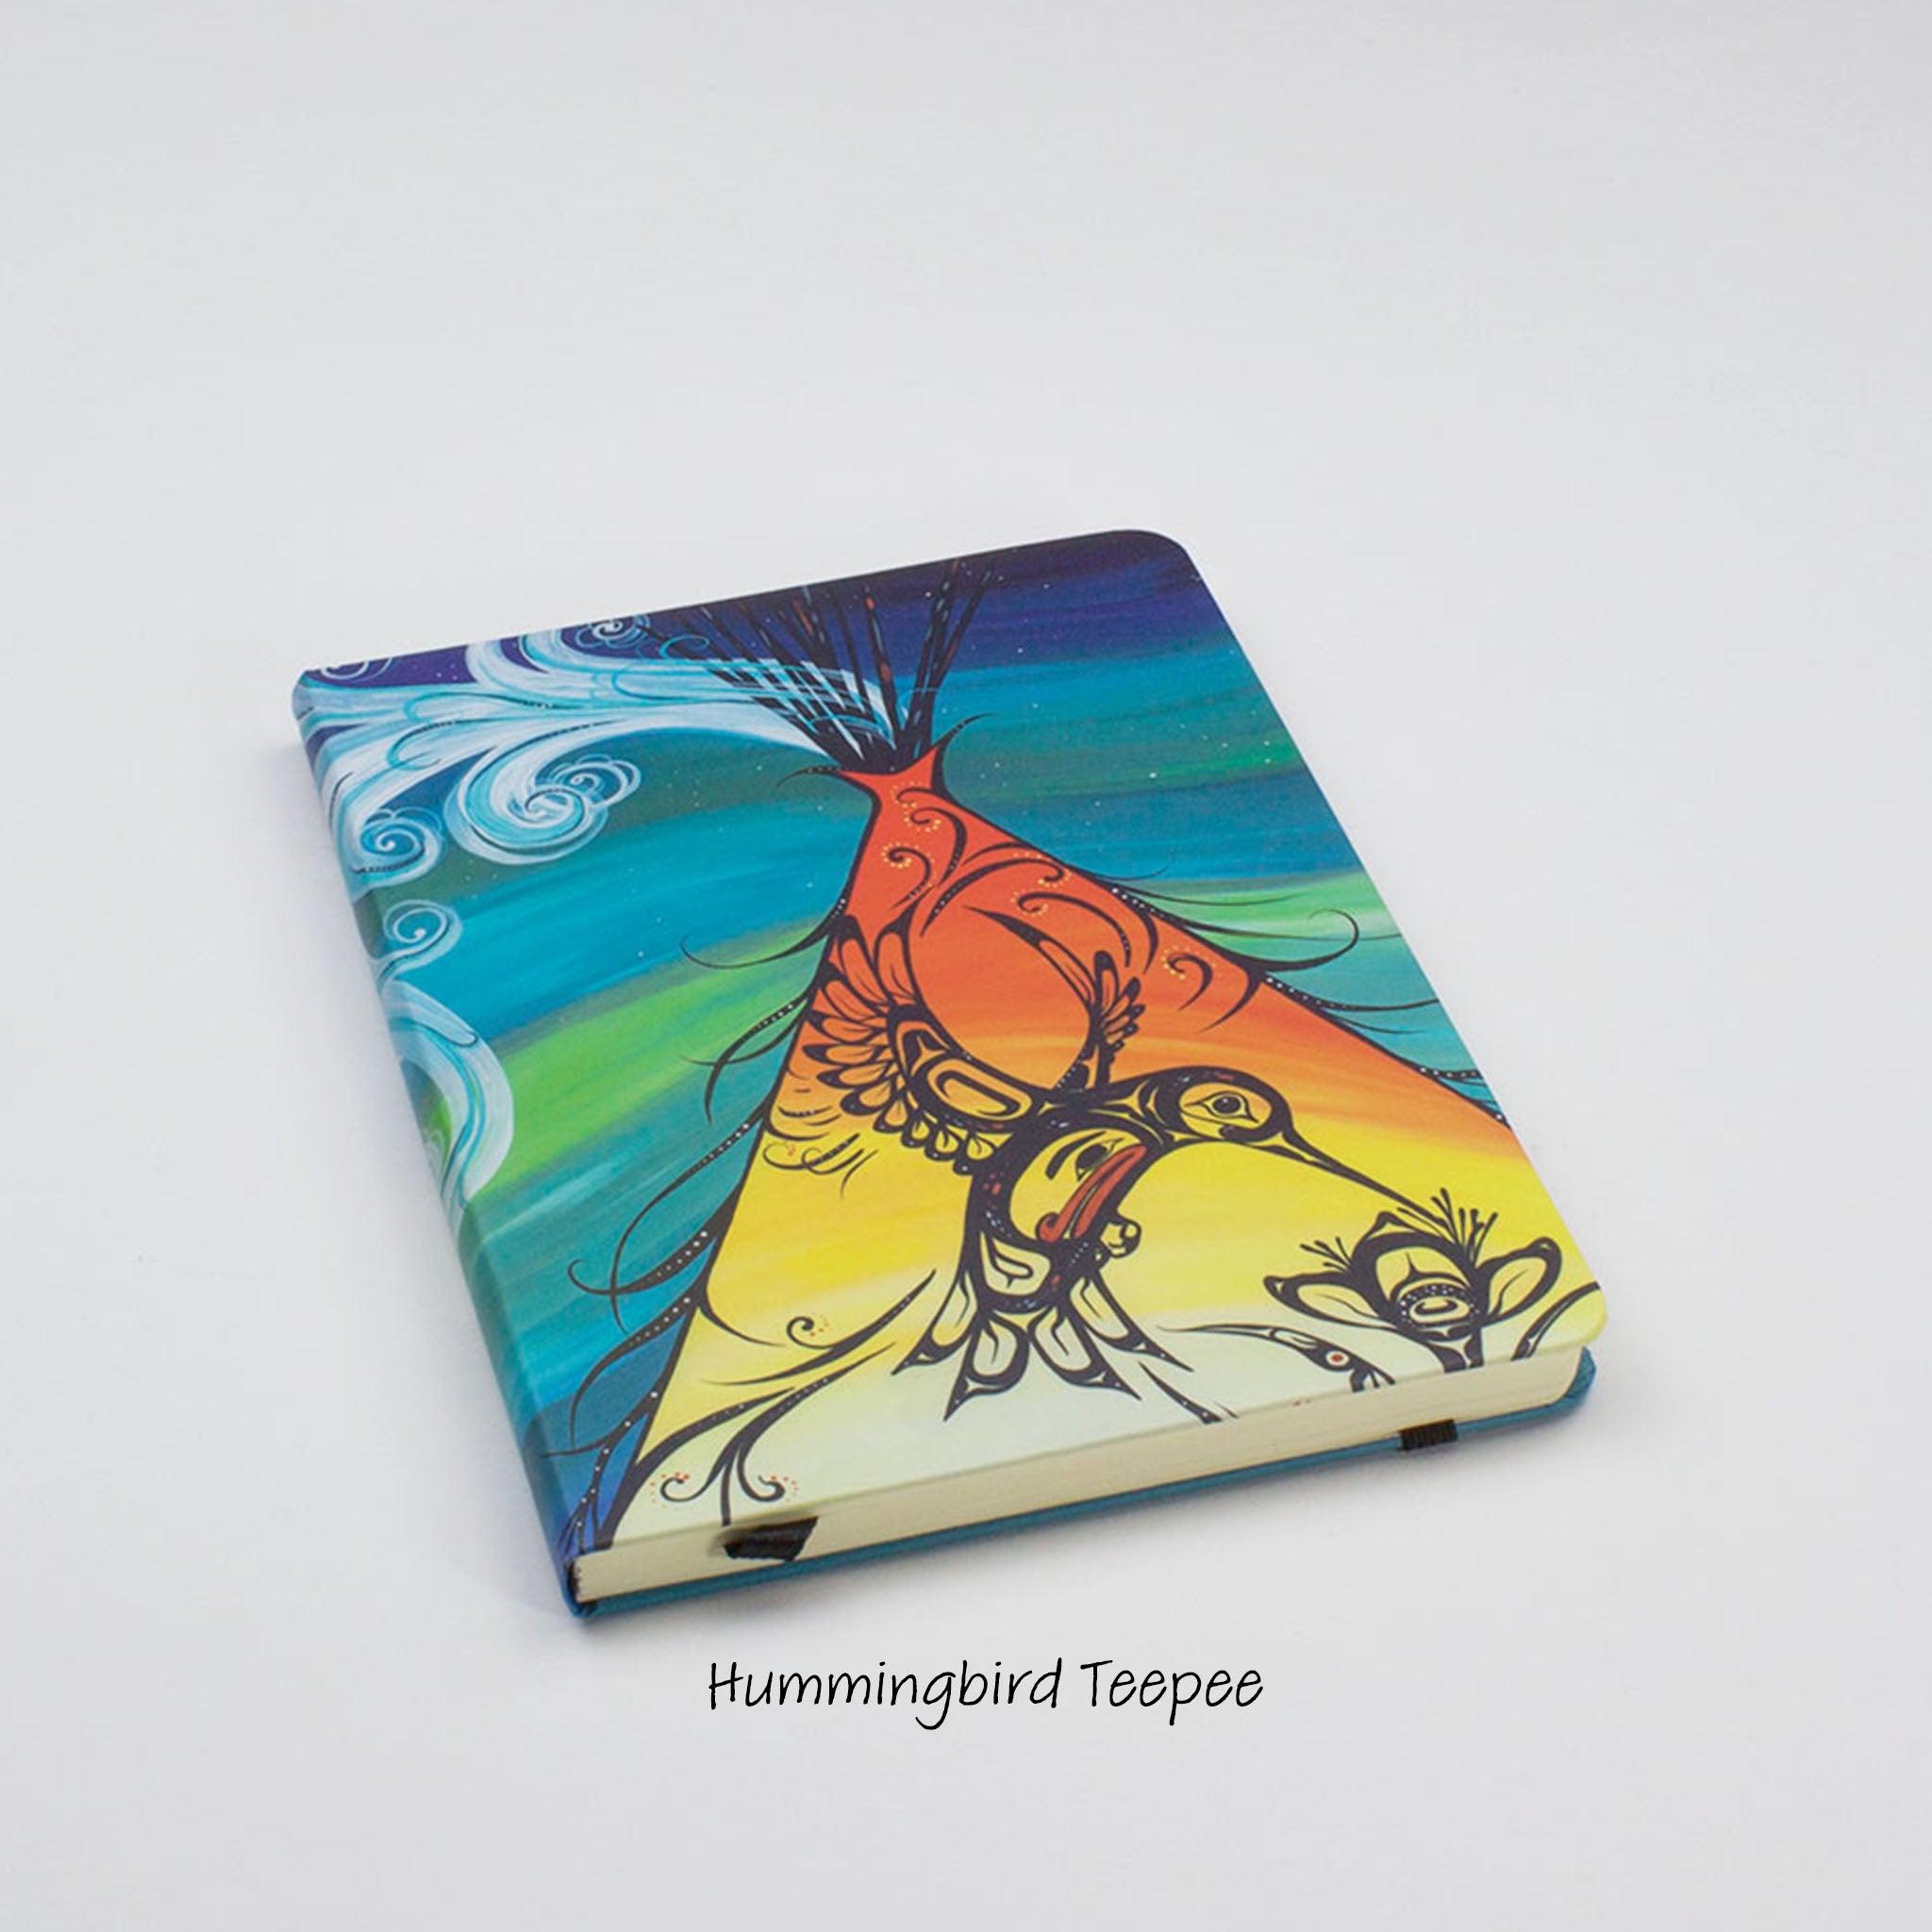 Journals featuring celebrated Indigenous artists